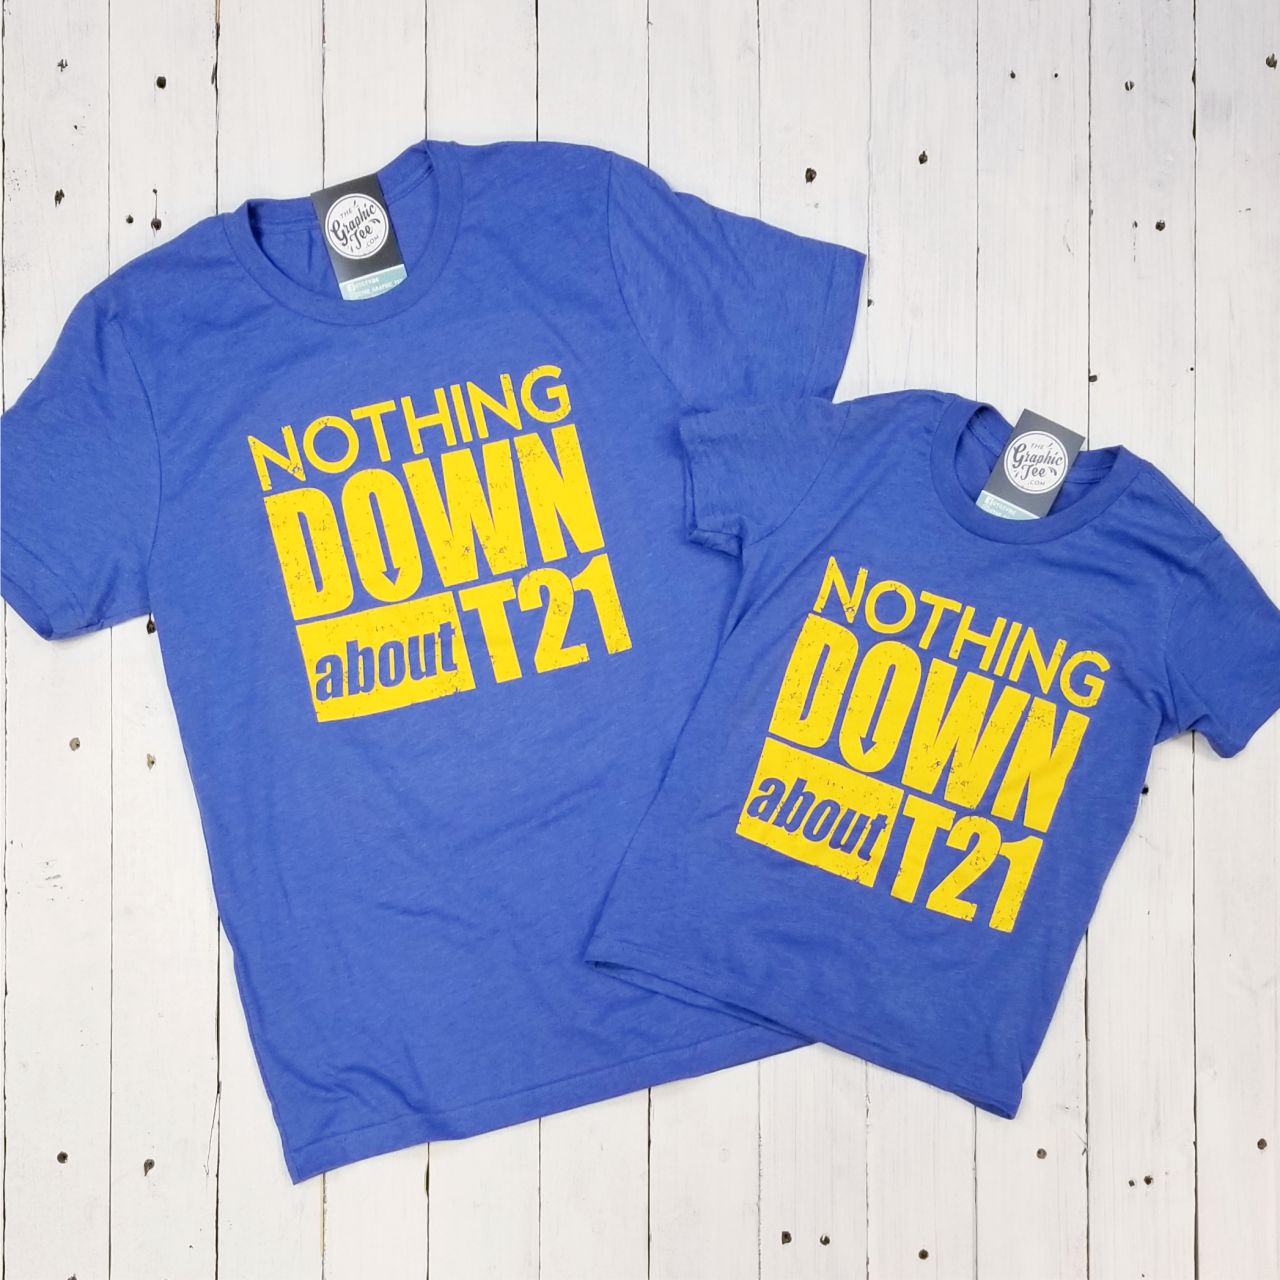 Nothing Down About T21 - Adult Tee - The Graphic Tee